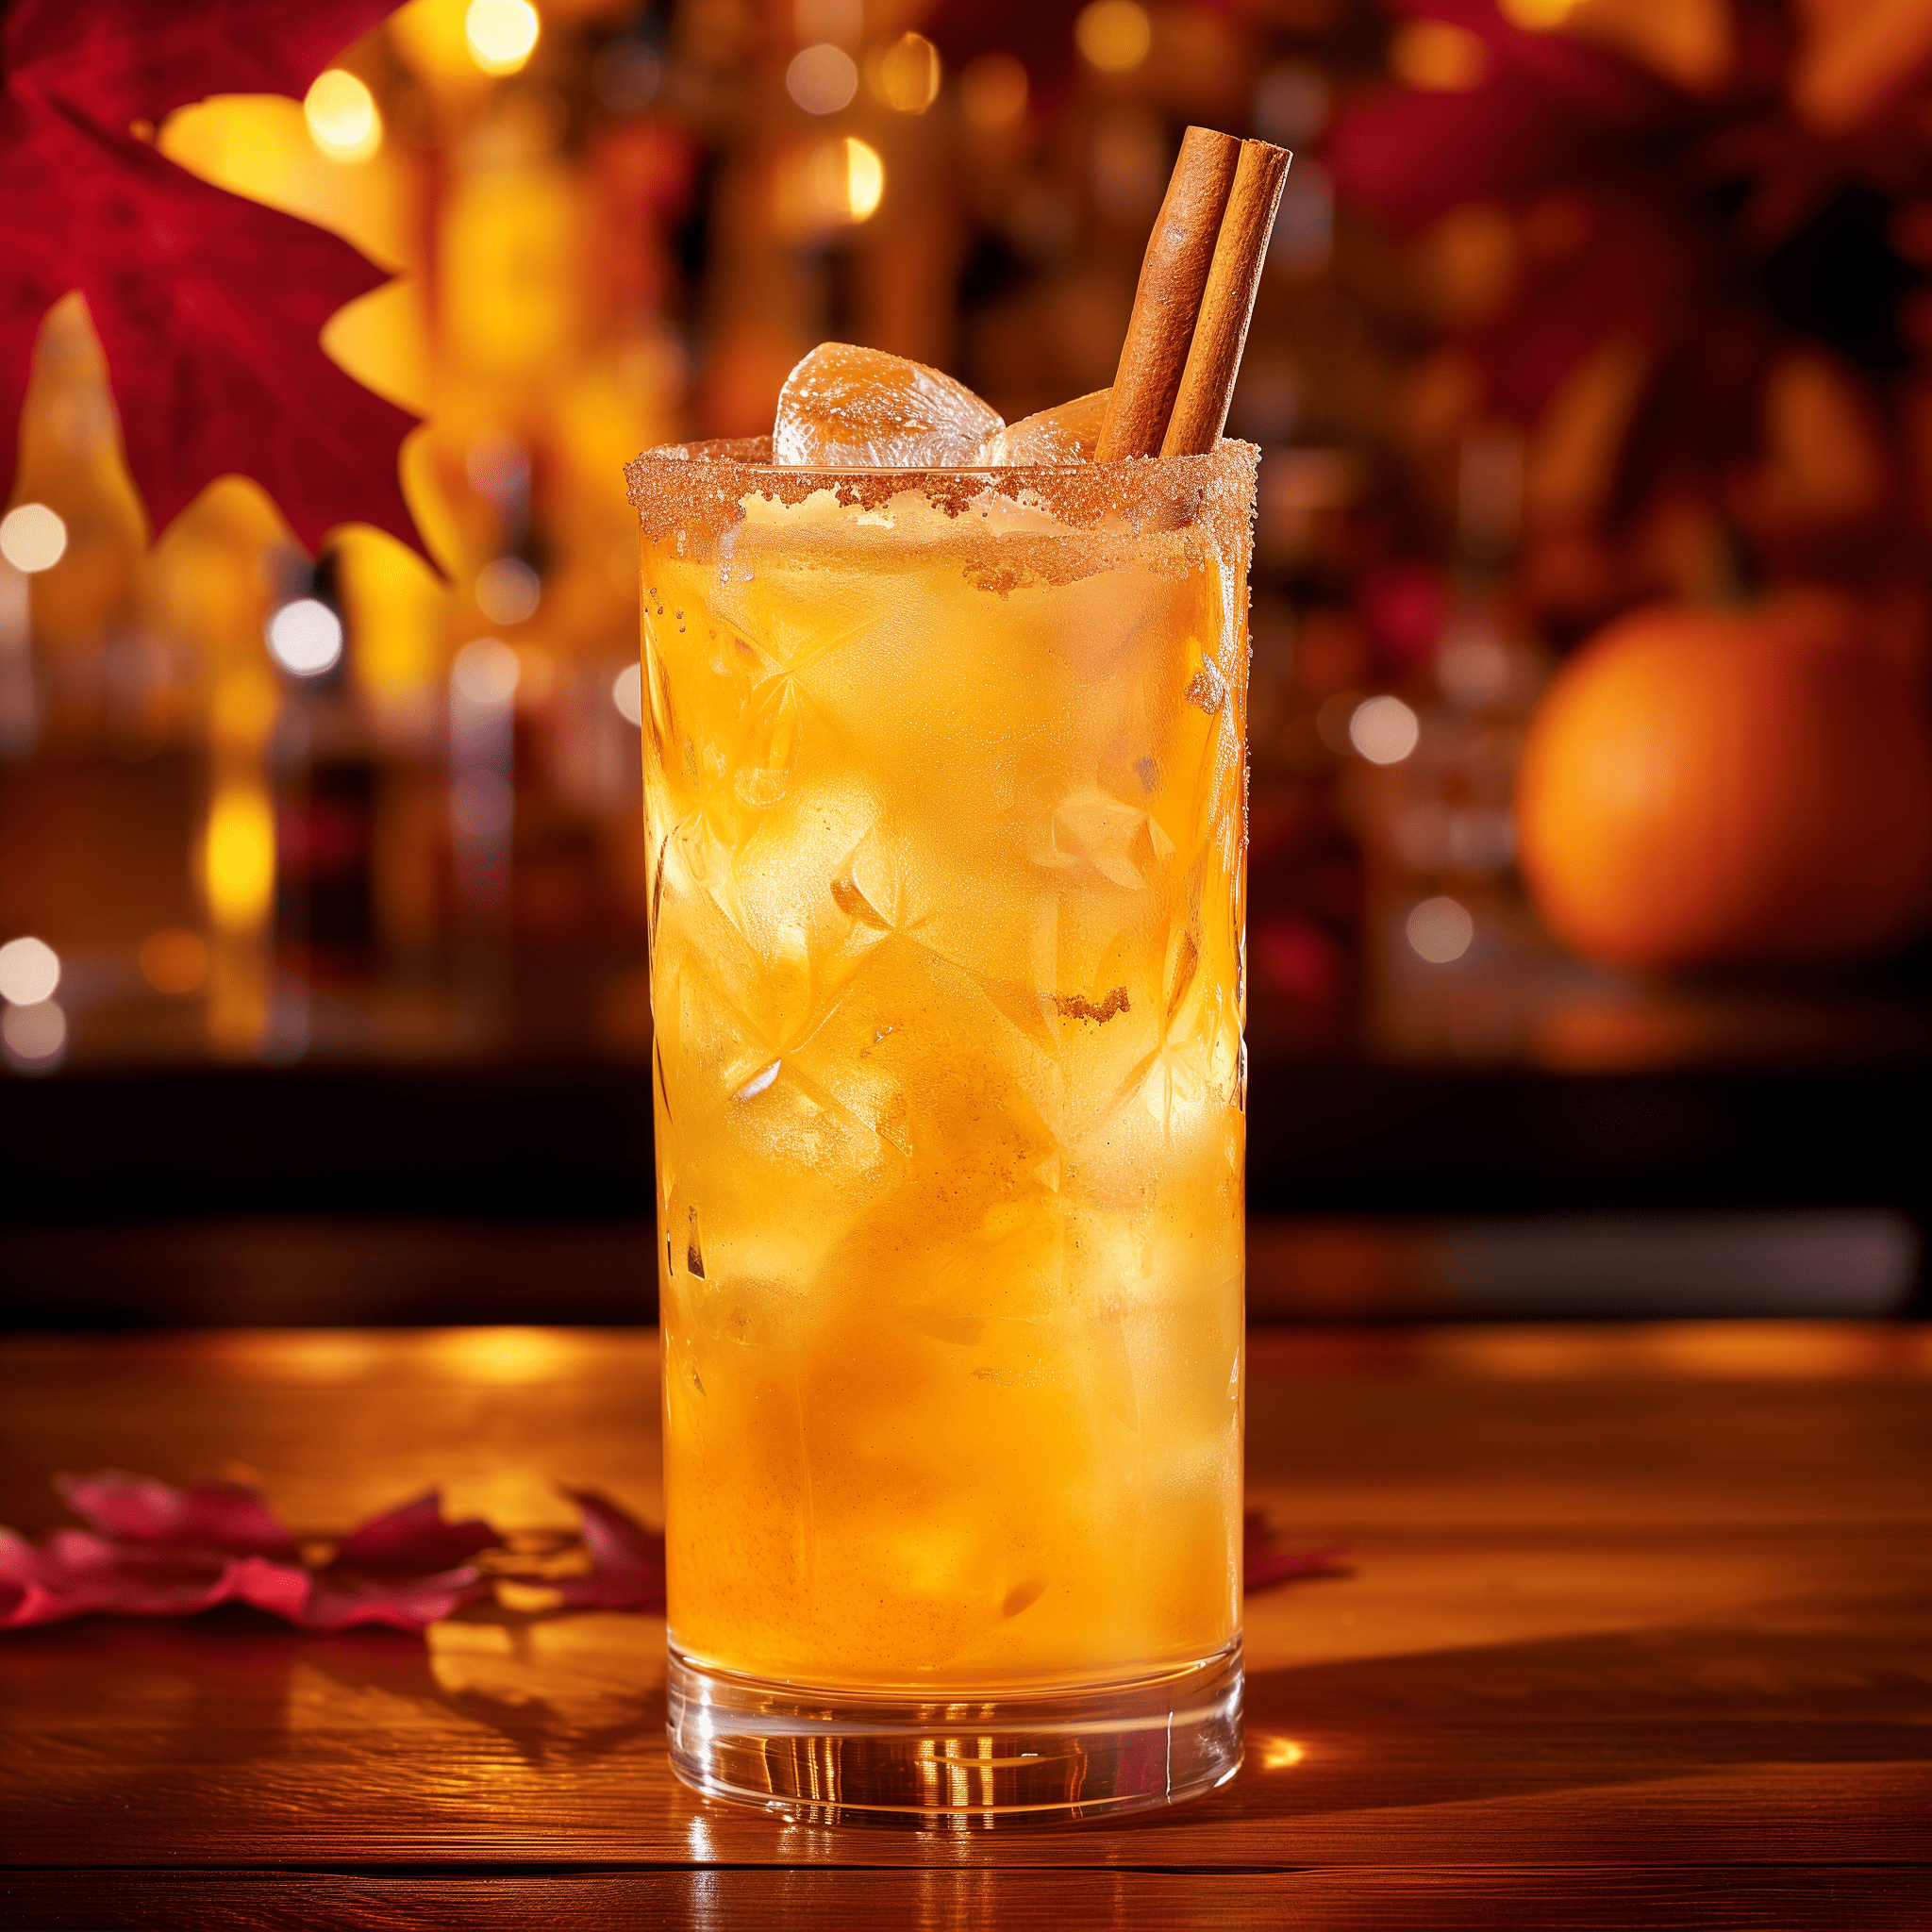 Harvest Mule Cocktail Recipe - The Harvest Mule offers a harmonious blend of sweet and spicy flavors. The clementine vodka provides a fruity and slightly tangy base, while the pumpkin spice adds a warm and aromatic dimension. The ginger beer introduces a sharp, effervescent kick that balances the sweetness, and the cinnamon stick garnish infuses a subtle woody spice throughout the drink.